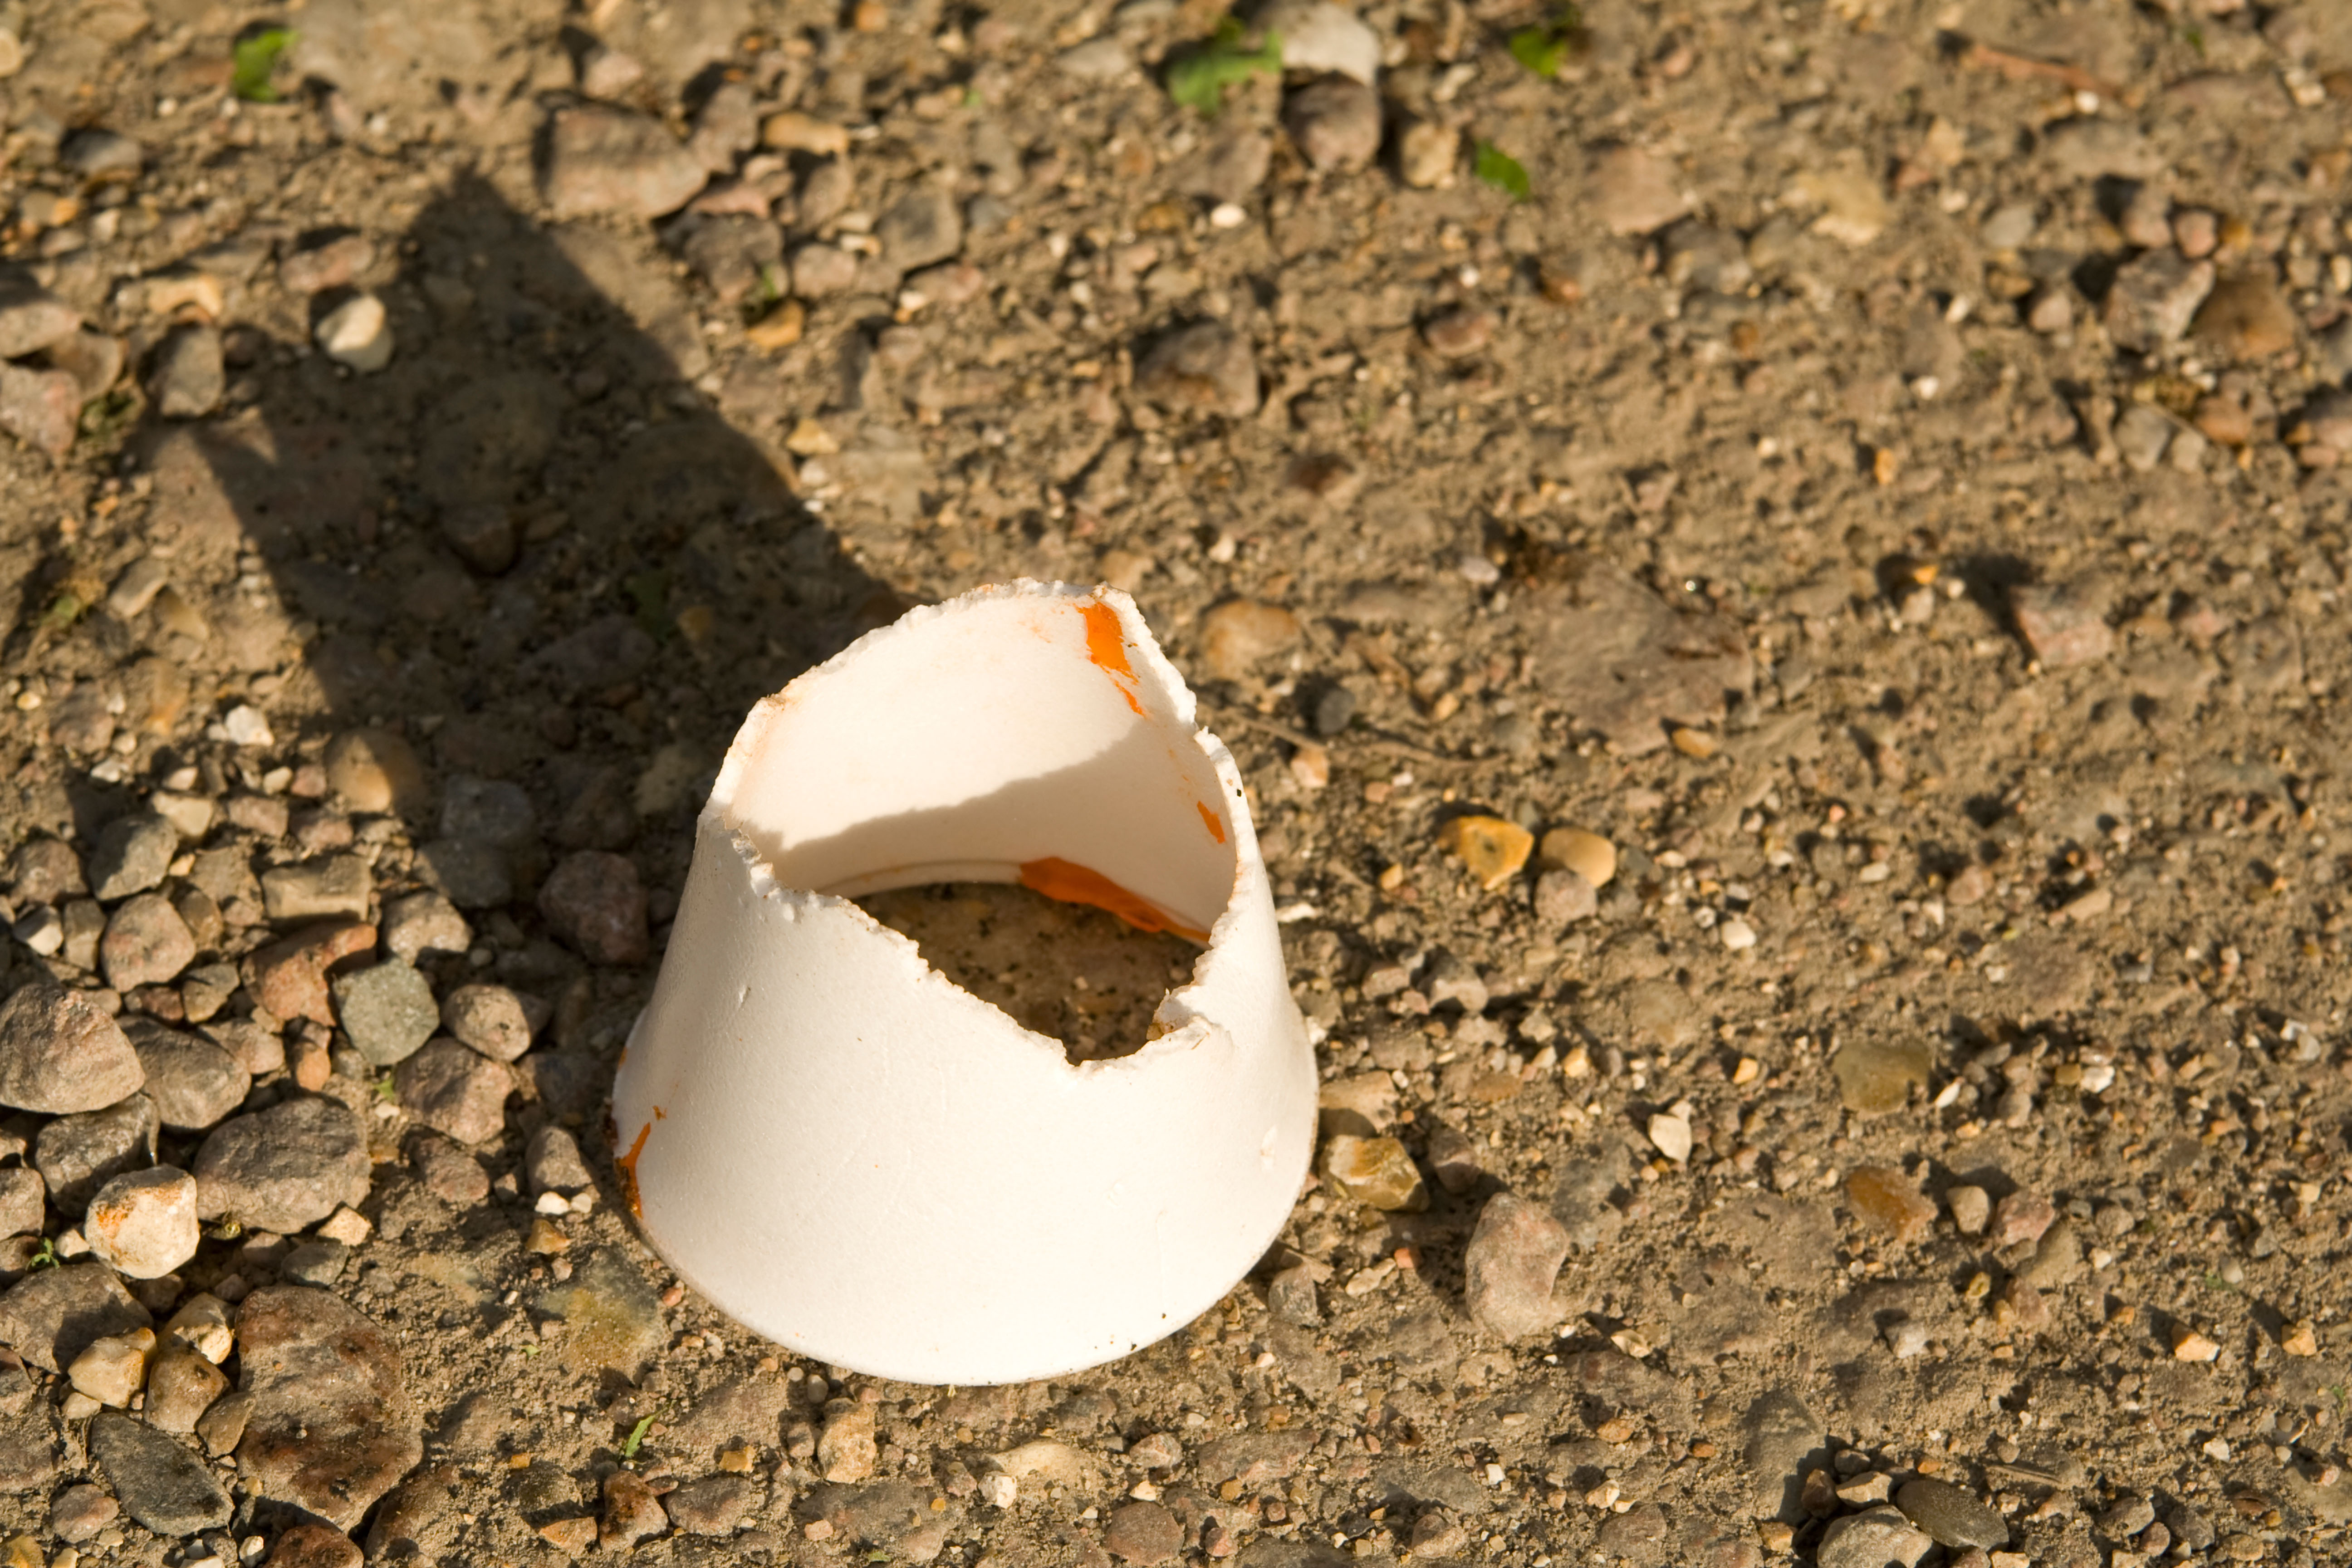 Discarded cup